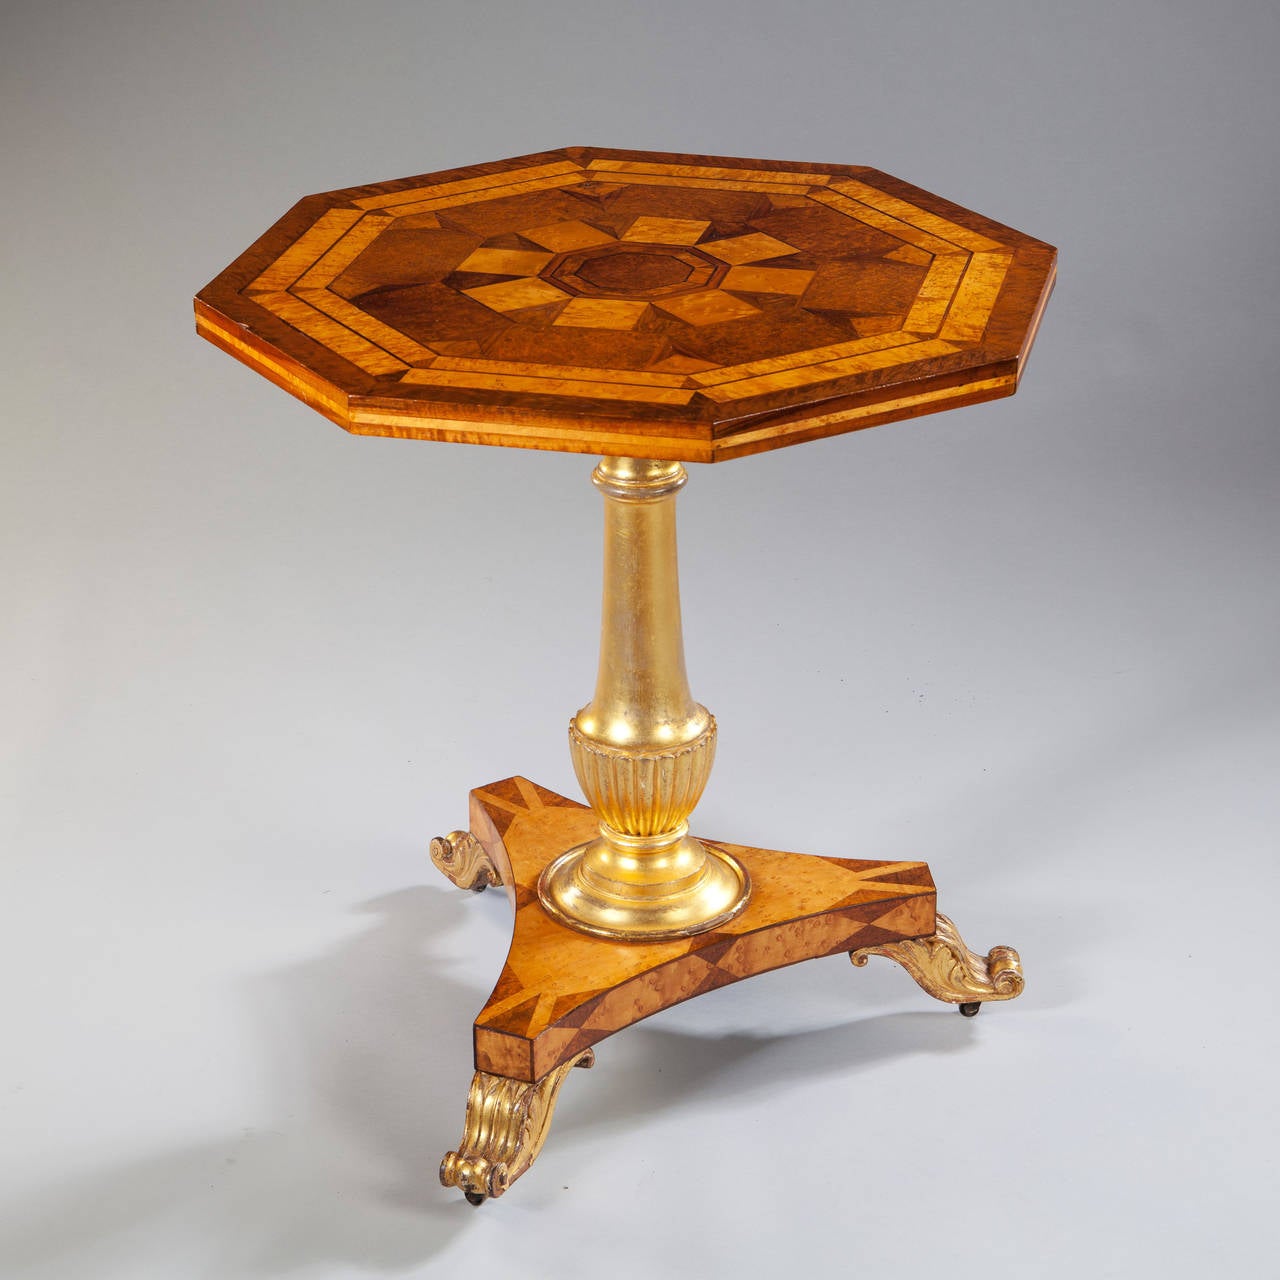 Neoclassical Revival 19th Century Marquetry, Tilt-Top Occasional Table